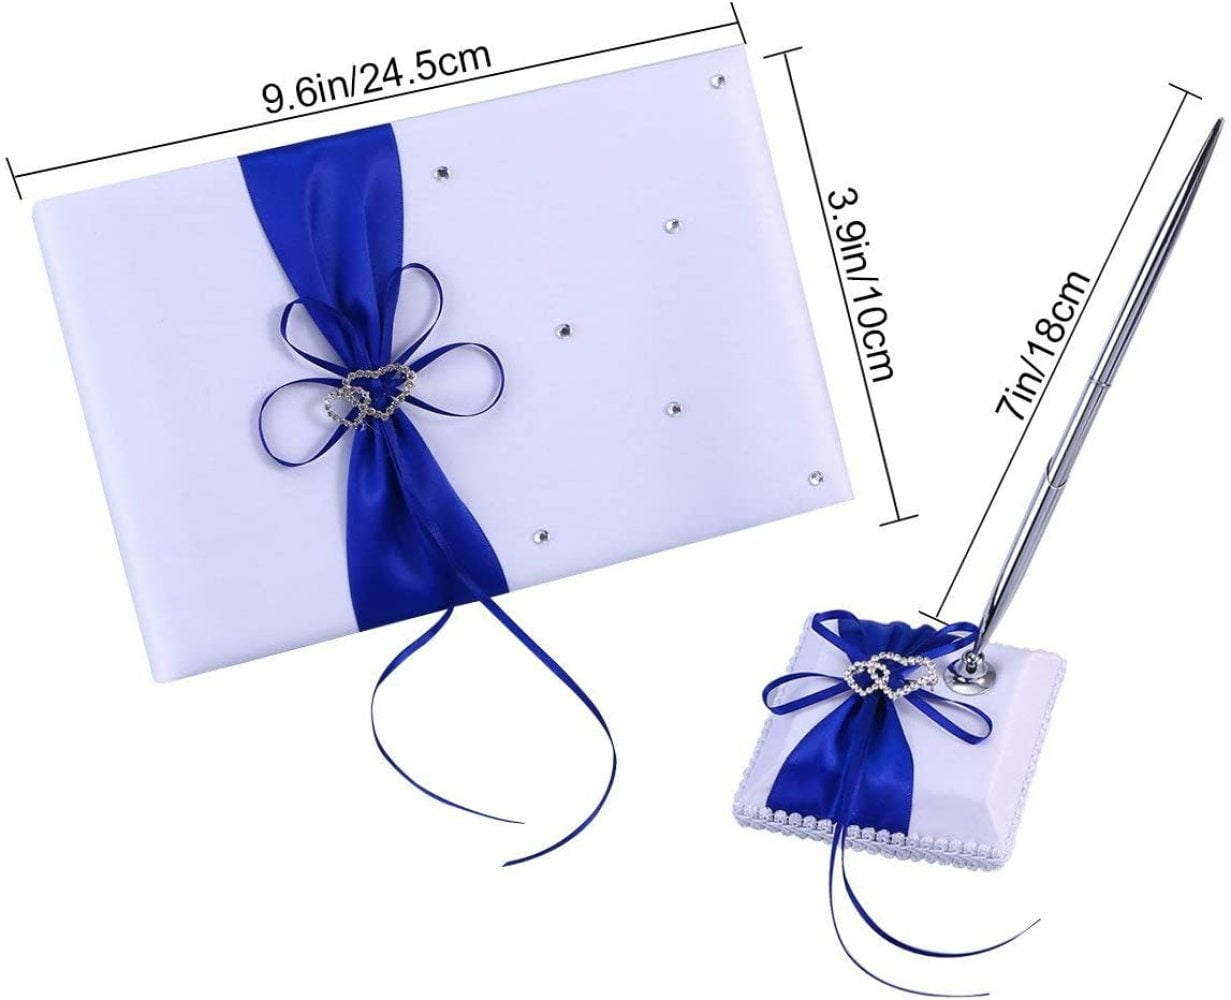 White Satin Wedding Guest Book and Pen Set with Royal Blue Ribbon Bowknot 